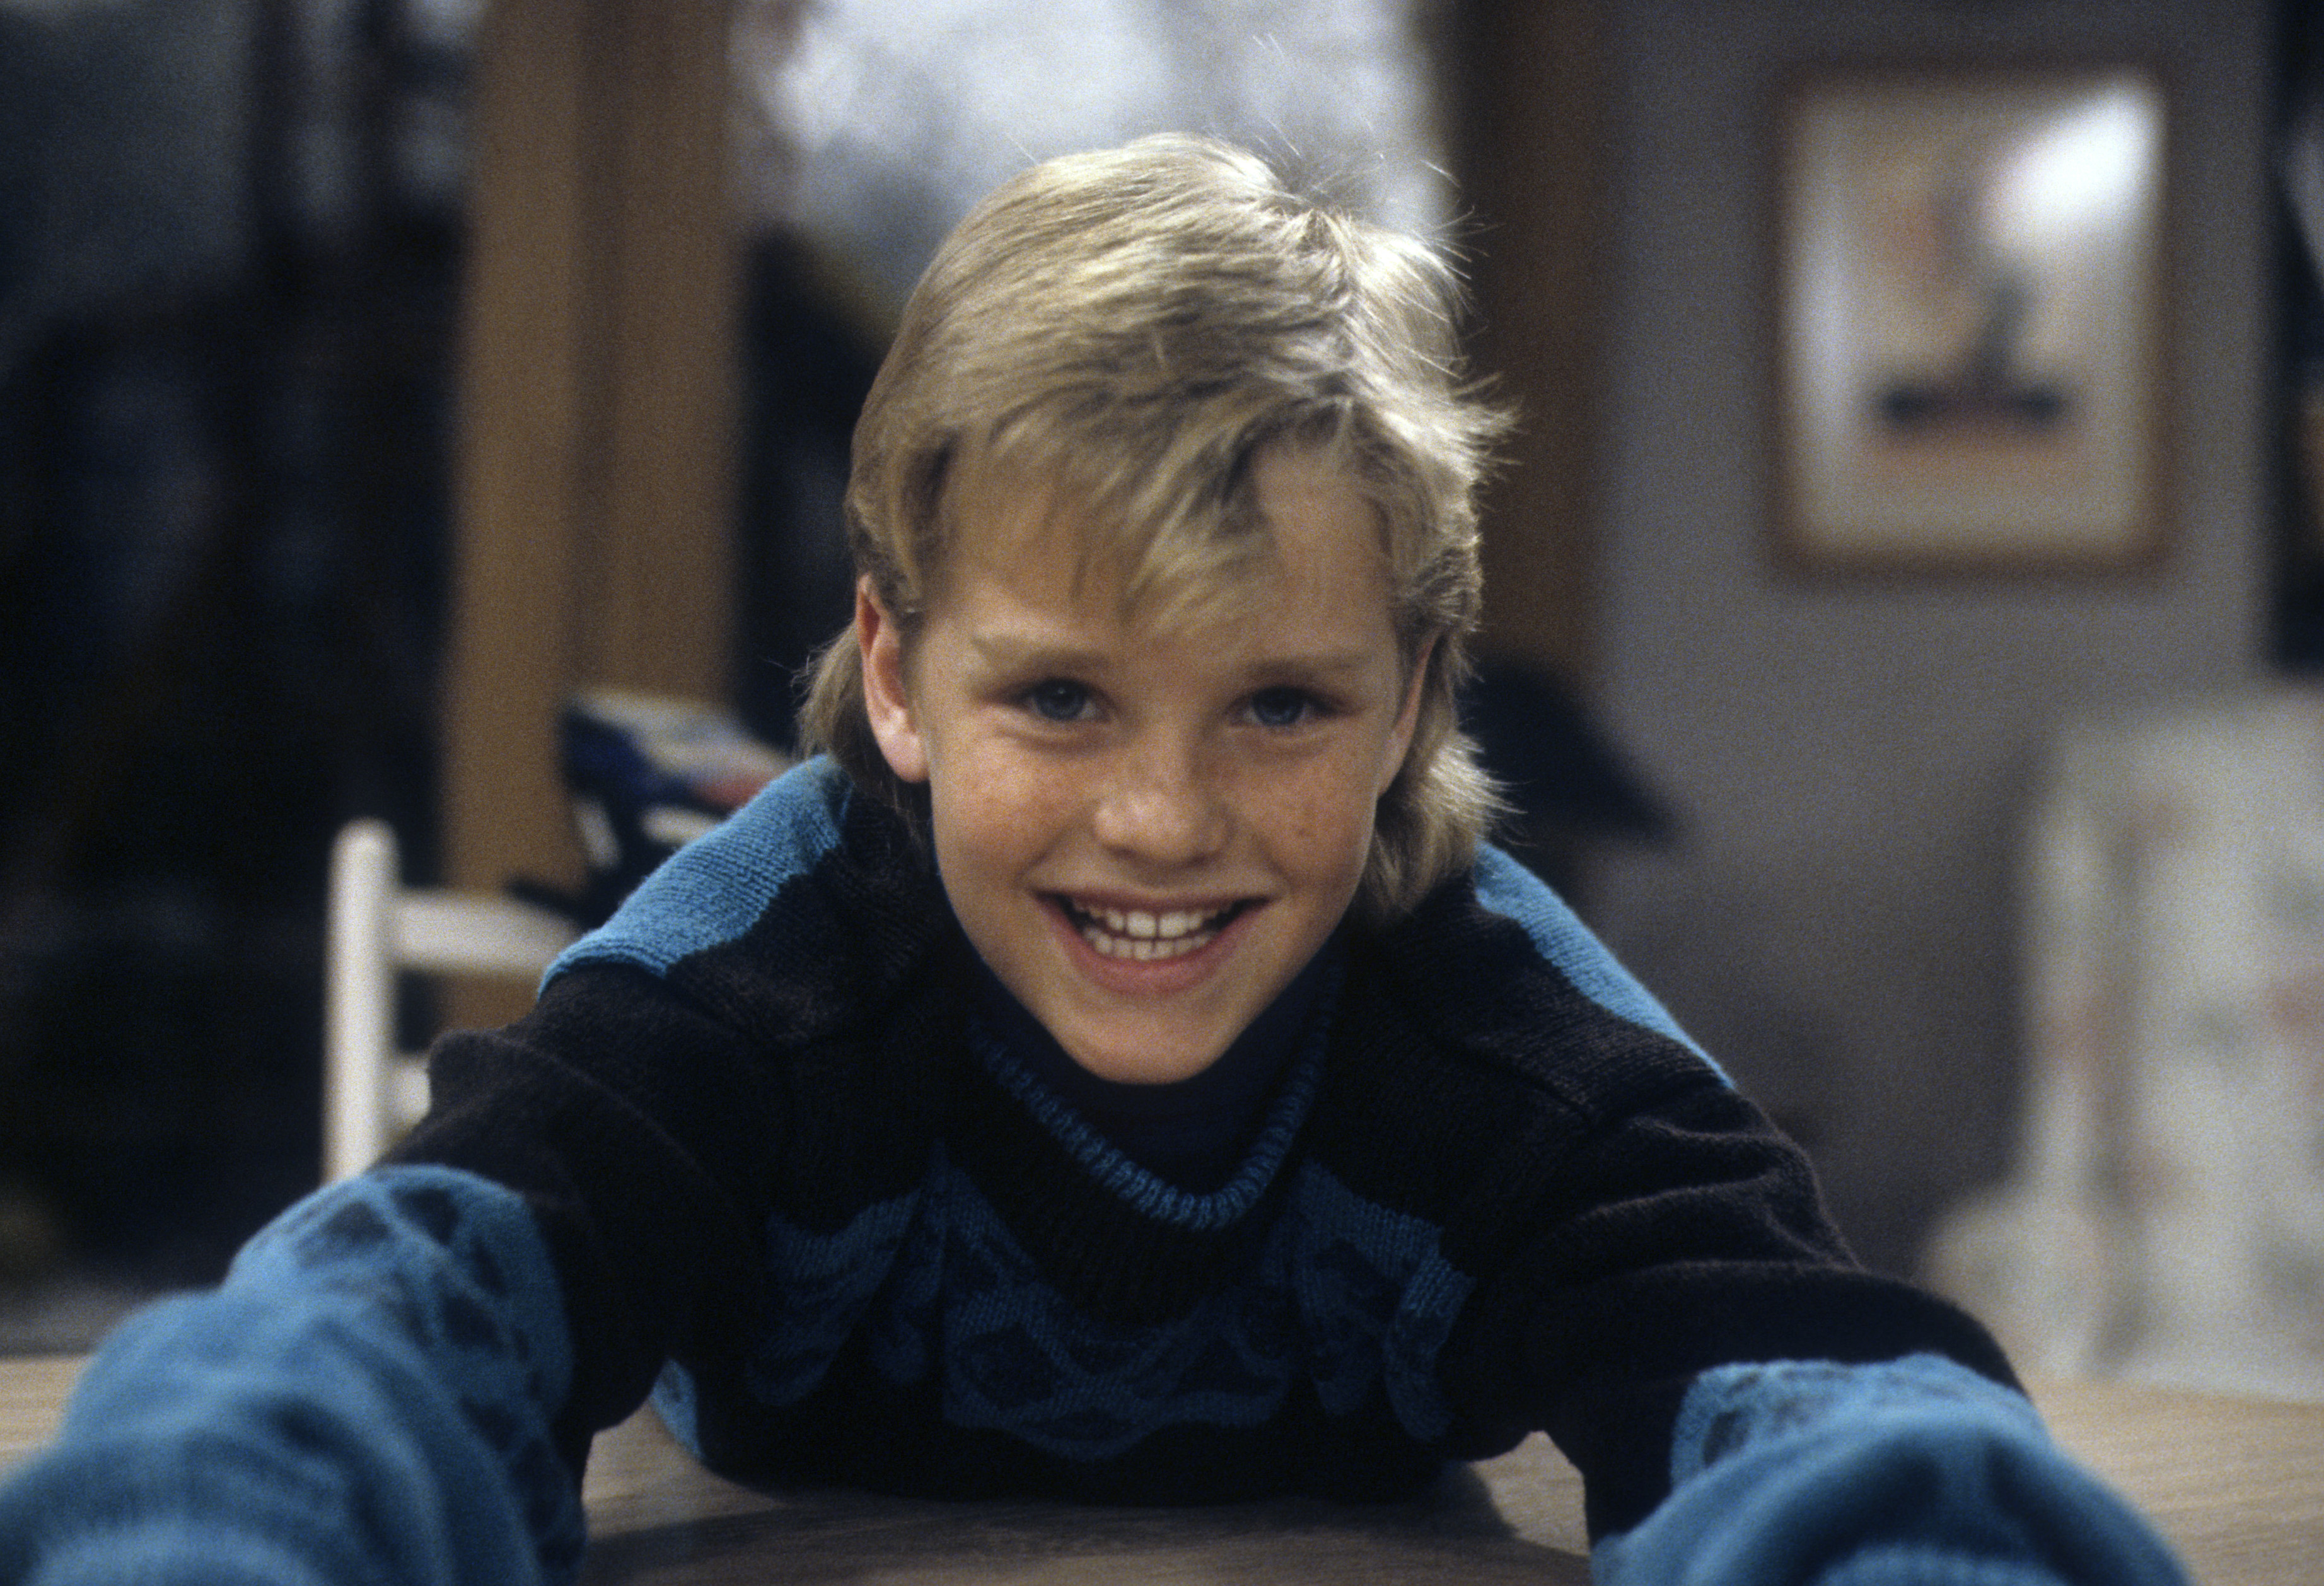 Zachery Tyler "Ty" Bryan as Brad Taylor in "Home Improvement" with a February 4, 1992, airdate | Source: Getty Images